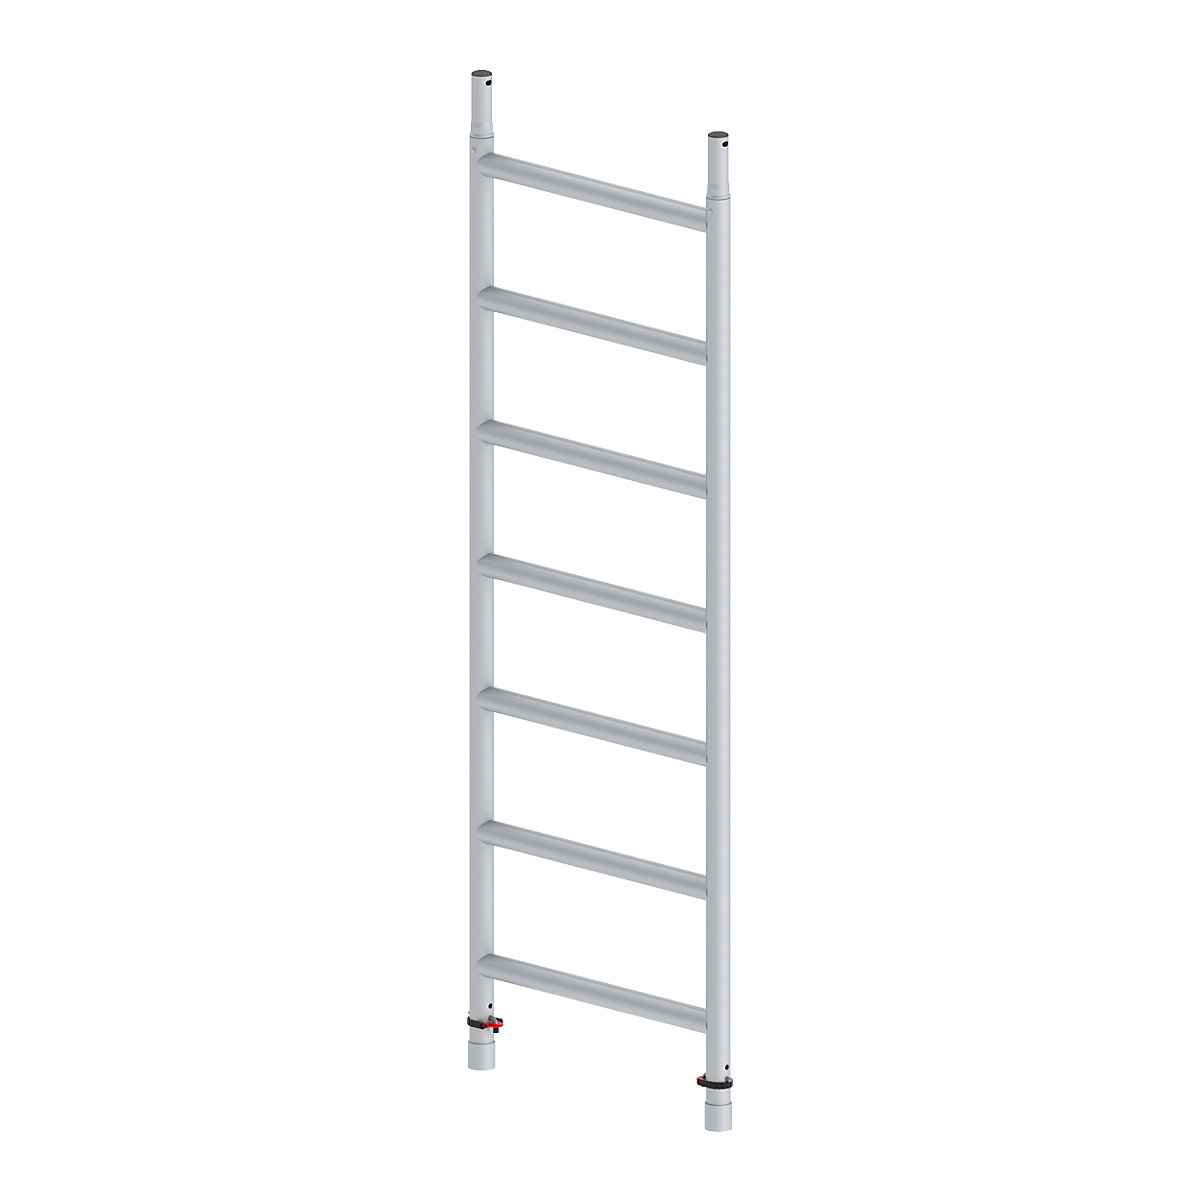 Frame – Altrex, for RS TOWER 4 series mobile access towers, for width 0.75 m, 7 cross struts-4